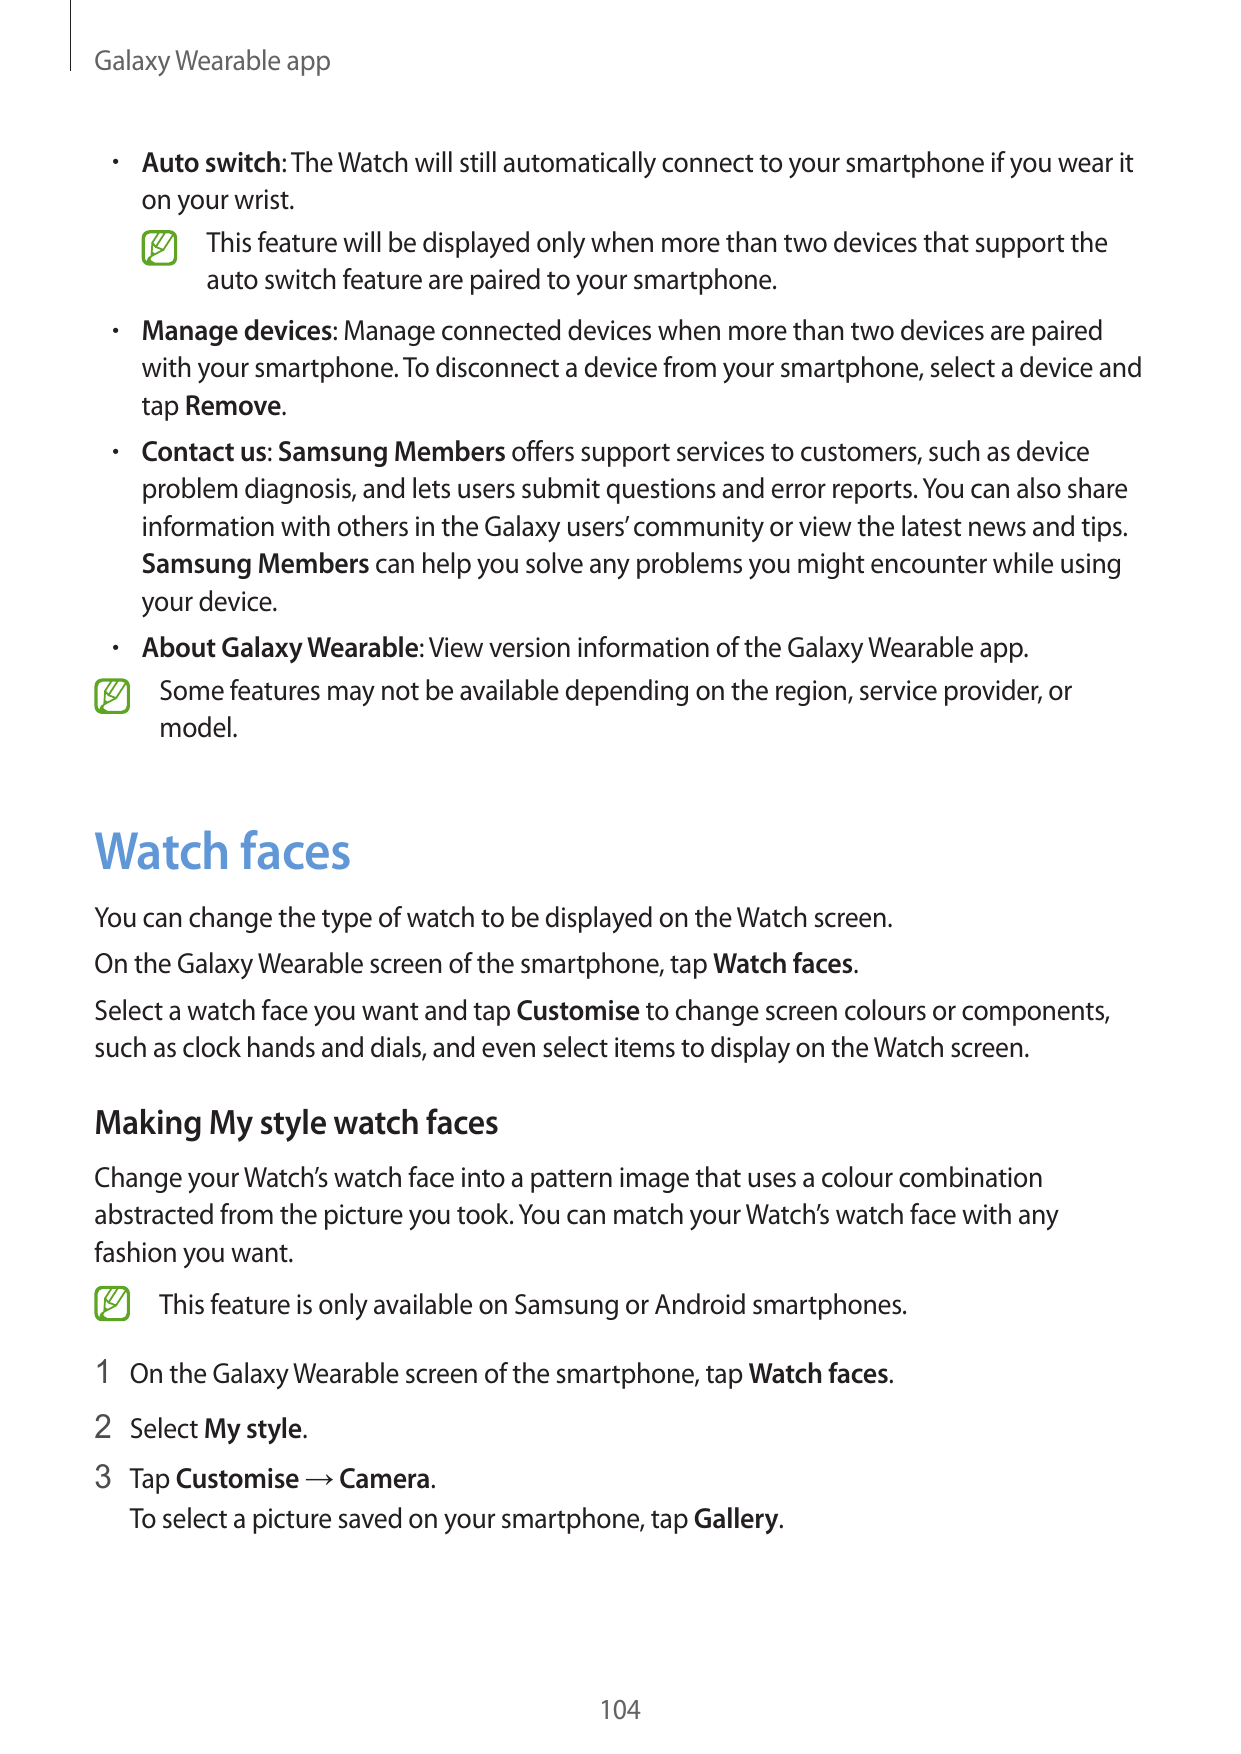 Galaxy Wearable app• Auto switch: The Watch will still automatically connect to your smartphone if you wear iton your wrist.This